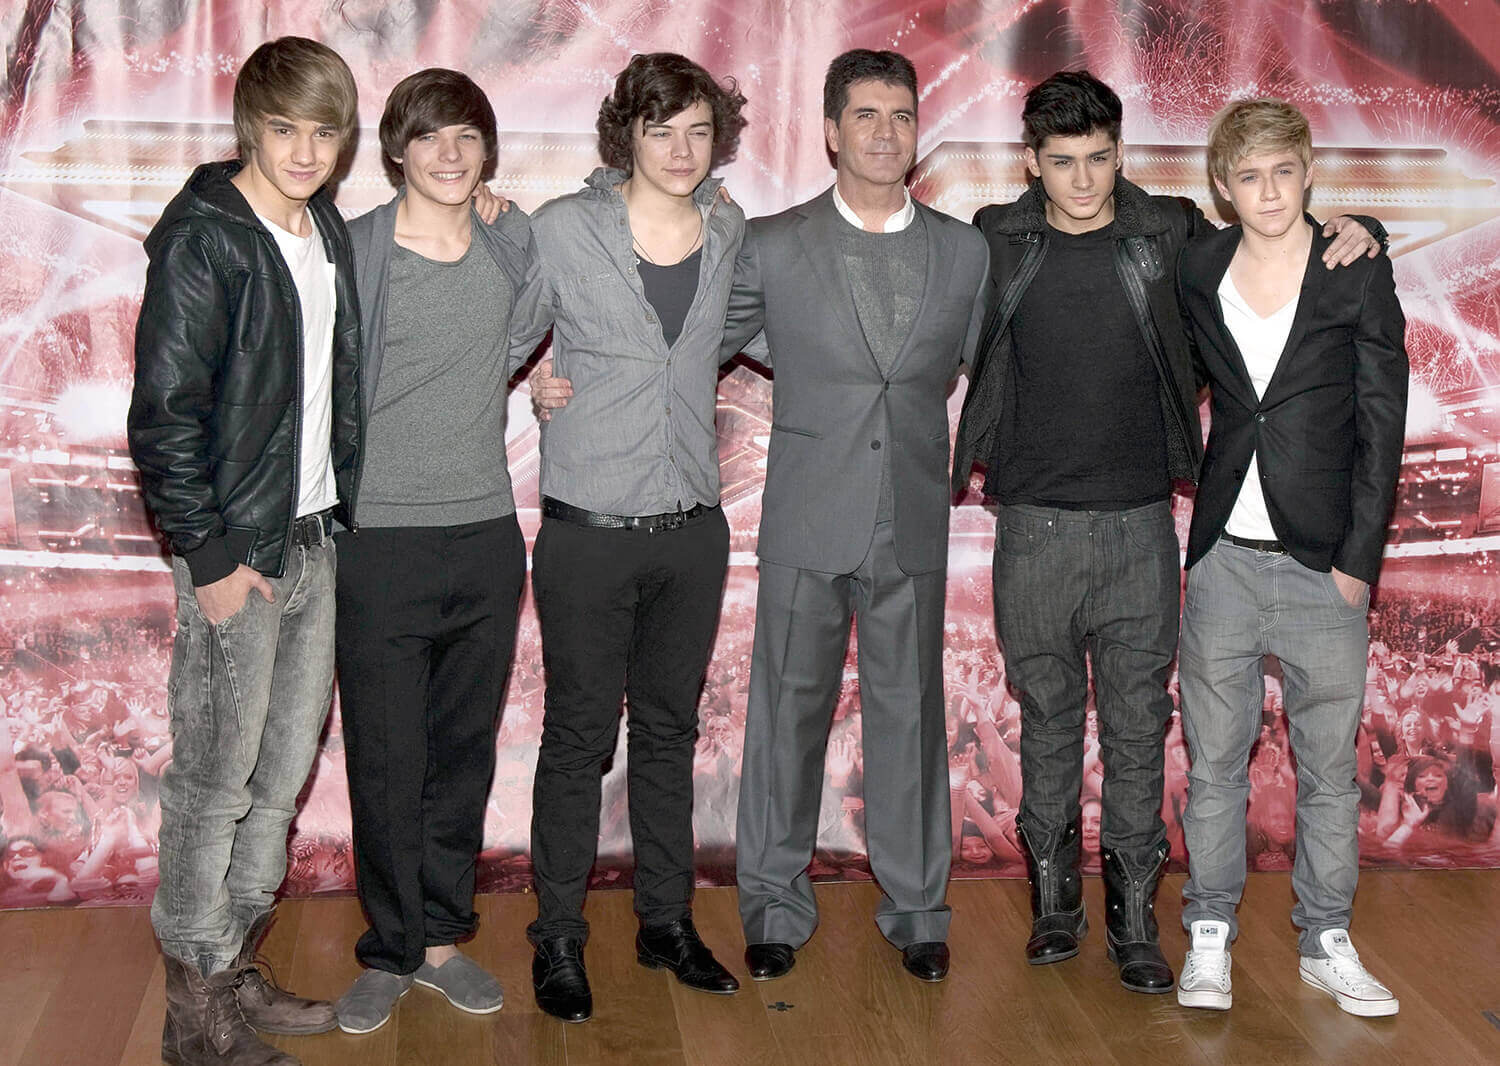 Liam Payne, Louis Tomlinson, Harry Styles, Simon Cowell, Zayn Malik, and Niall Horan pose together at a press conference for The X Factor in 2010